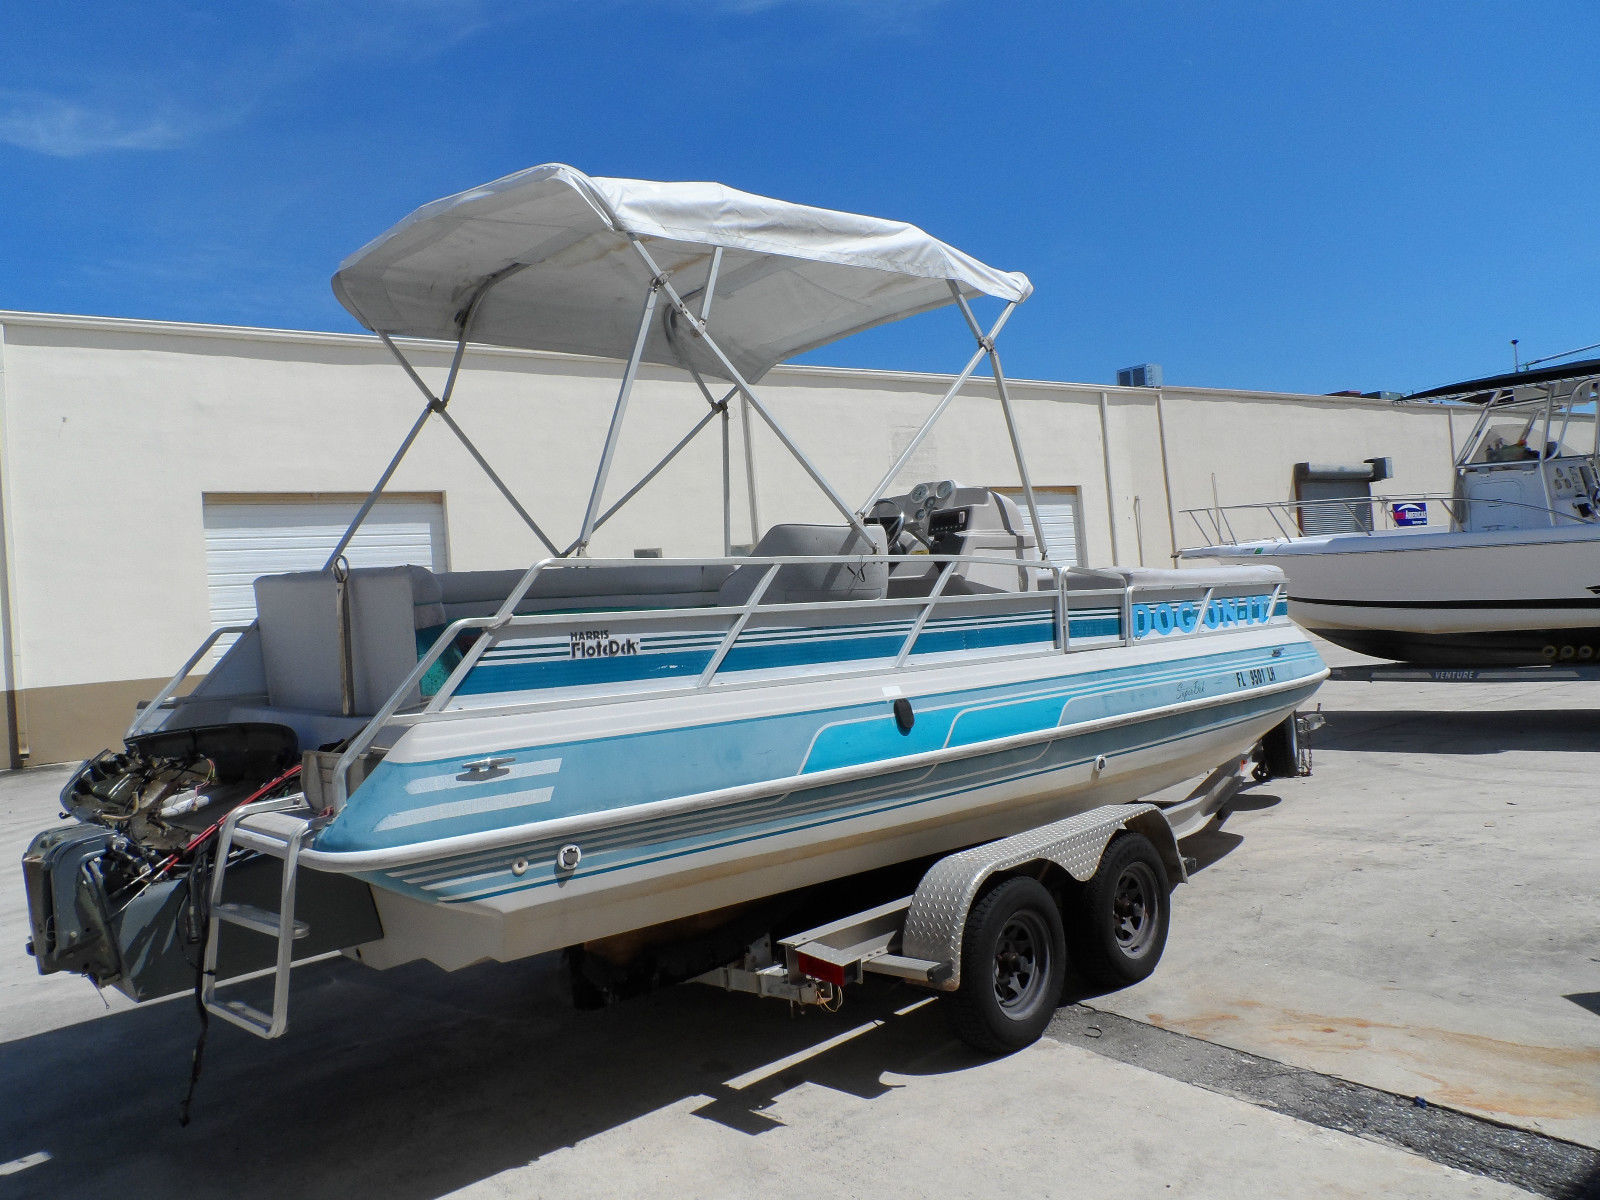 22FT HARRIS DECK BOAT boat for sale from USA